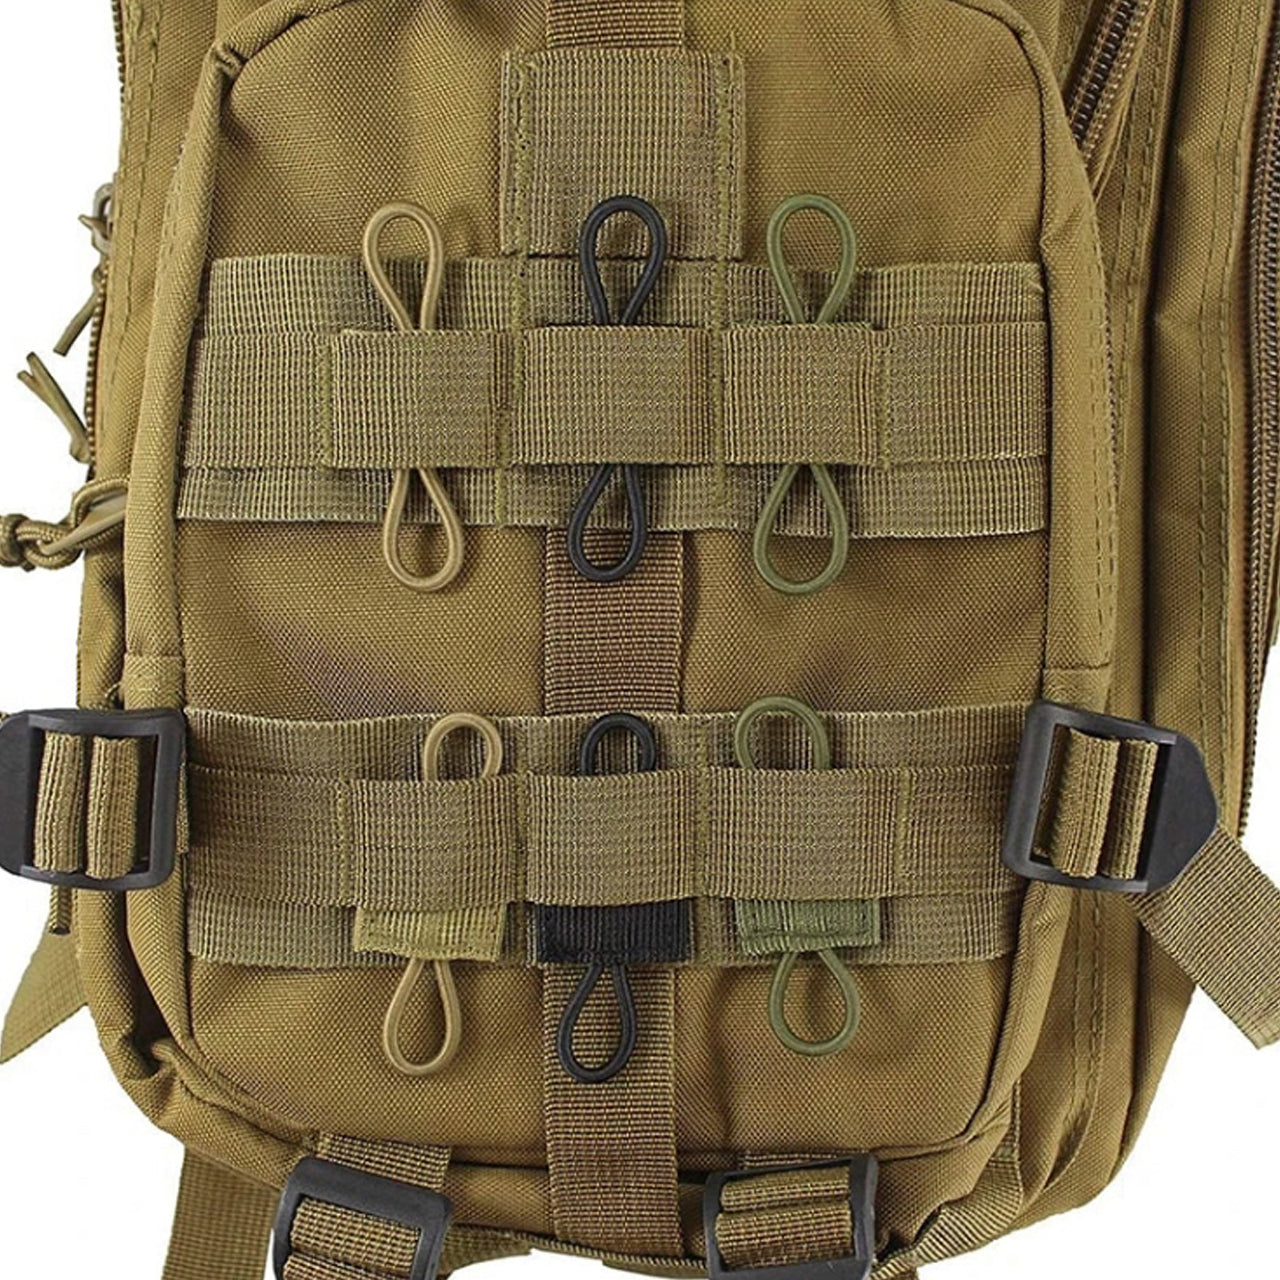 High quality MOLLE webbing fastners are great for attaching equipment such as torches and cylume sticks. Also great for securing camelbak tubes to webbing and other styles of equipment. Colours: Khaki OD Green Black www.defenceqstore.com.au